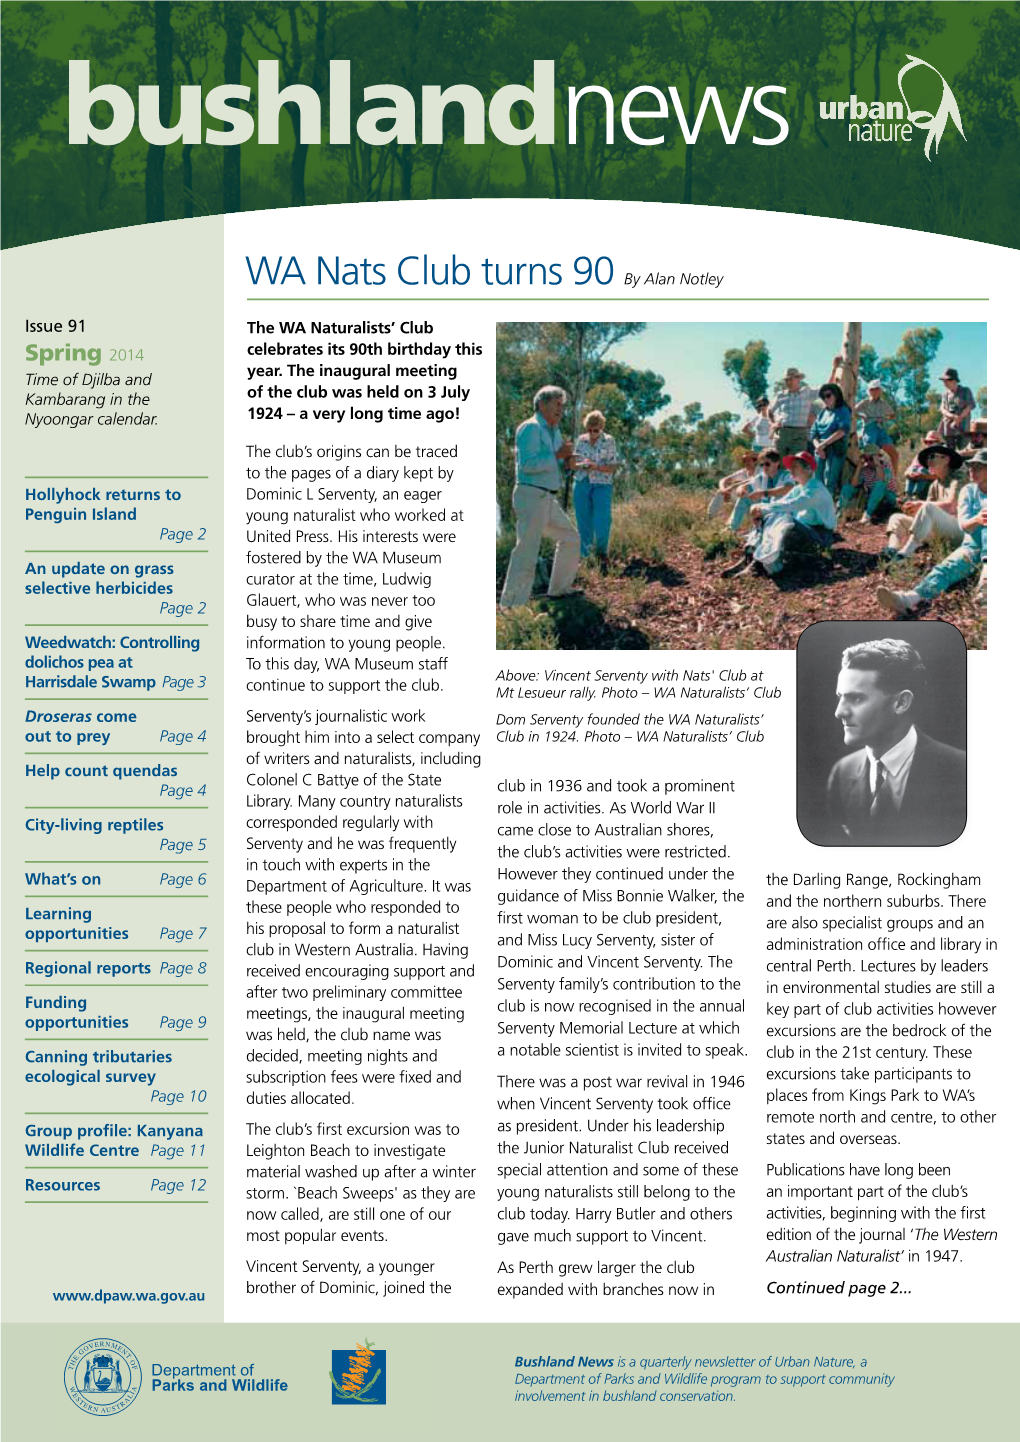 Bushland News Is a Quarterly Newsletter of Urban Nature, a Department of Parks and Wildlife Program to Support Community Involvement in Bushland Conservation